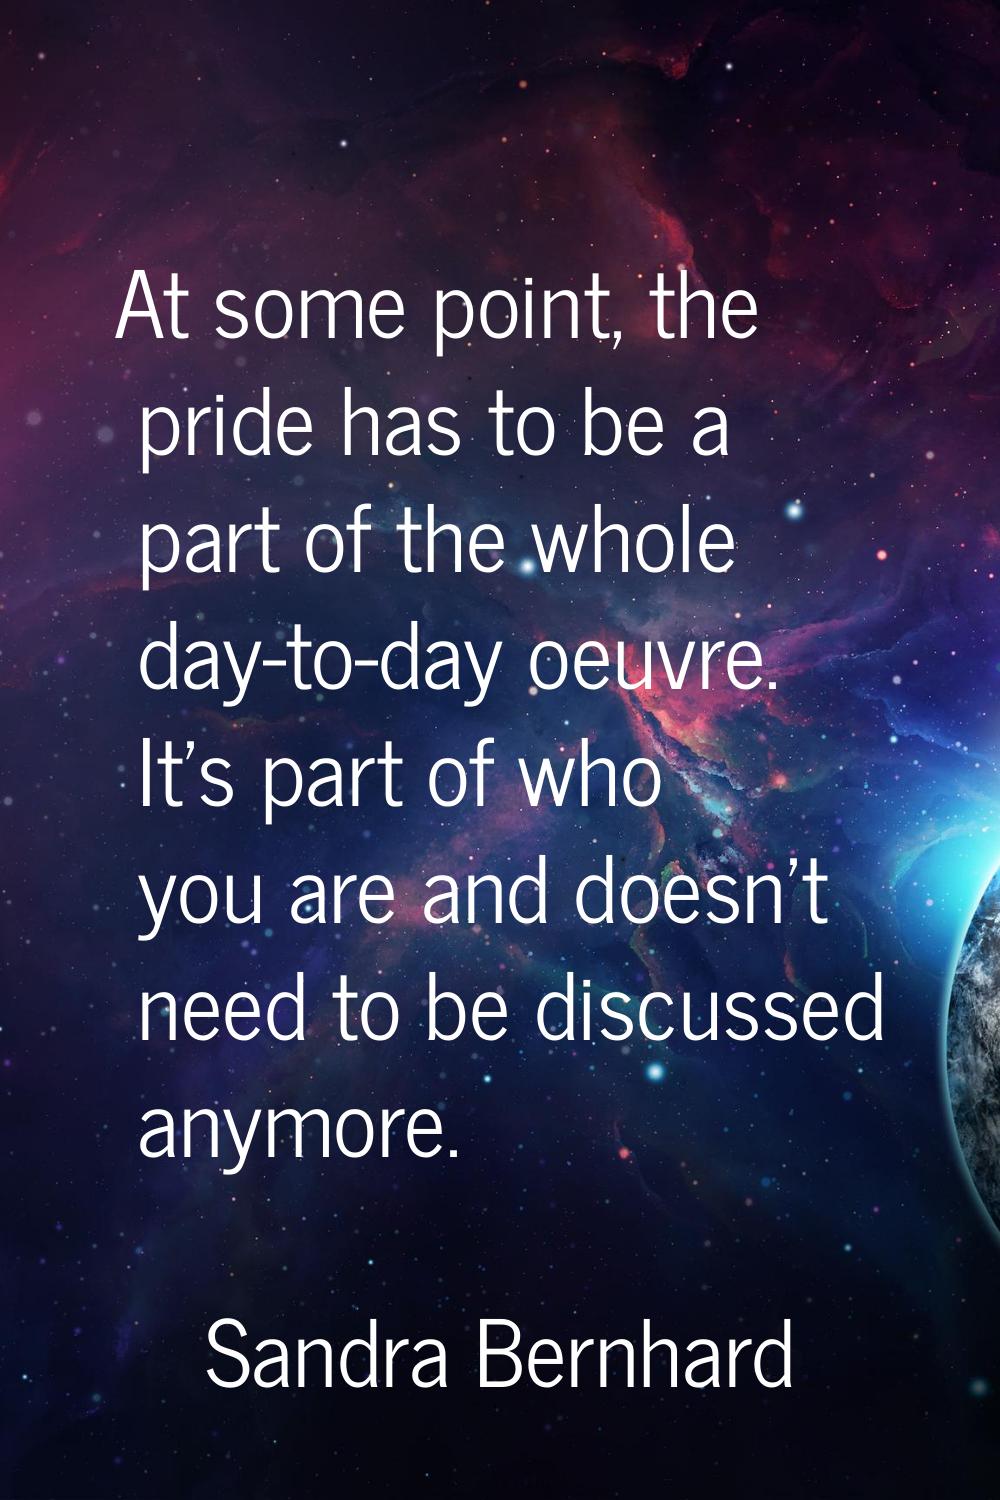 At some point, the pride has to be a part of the whole day-to-day oeuvre. It's part of who you are 